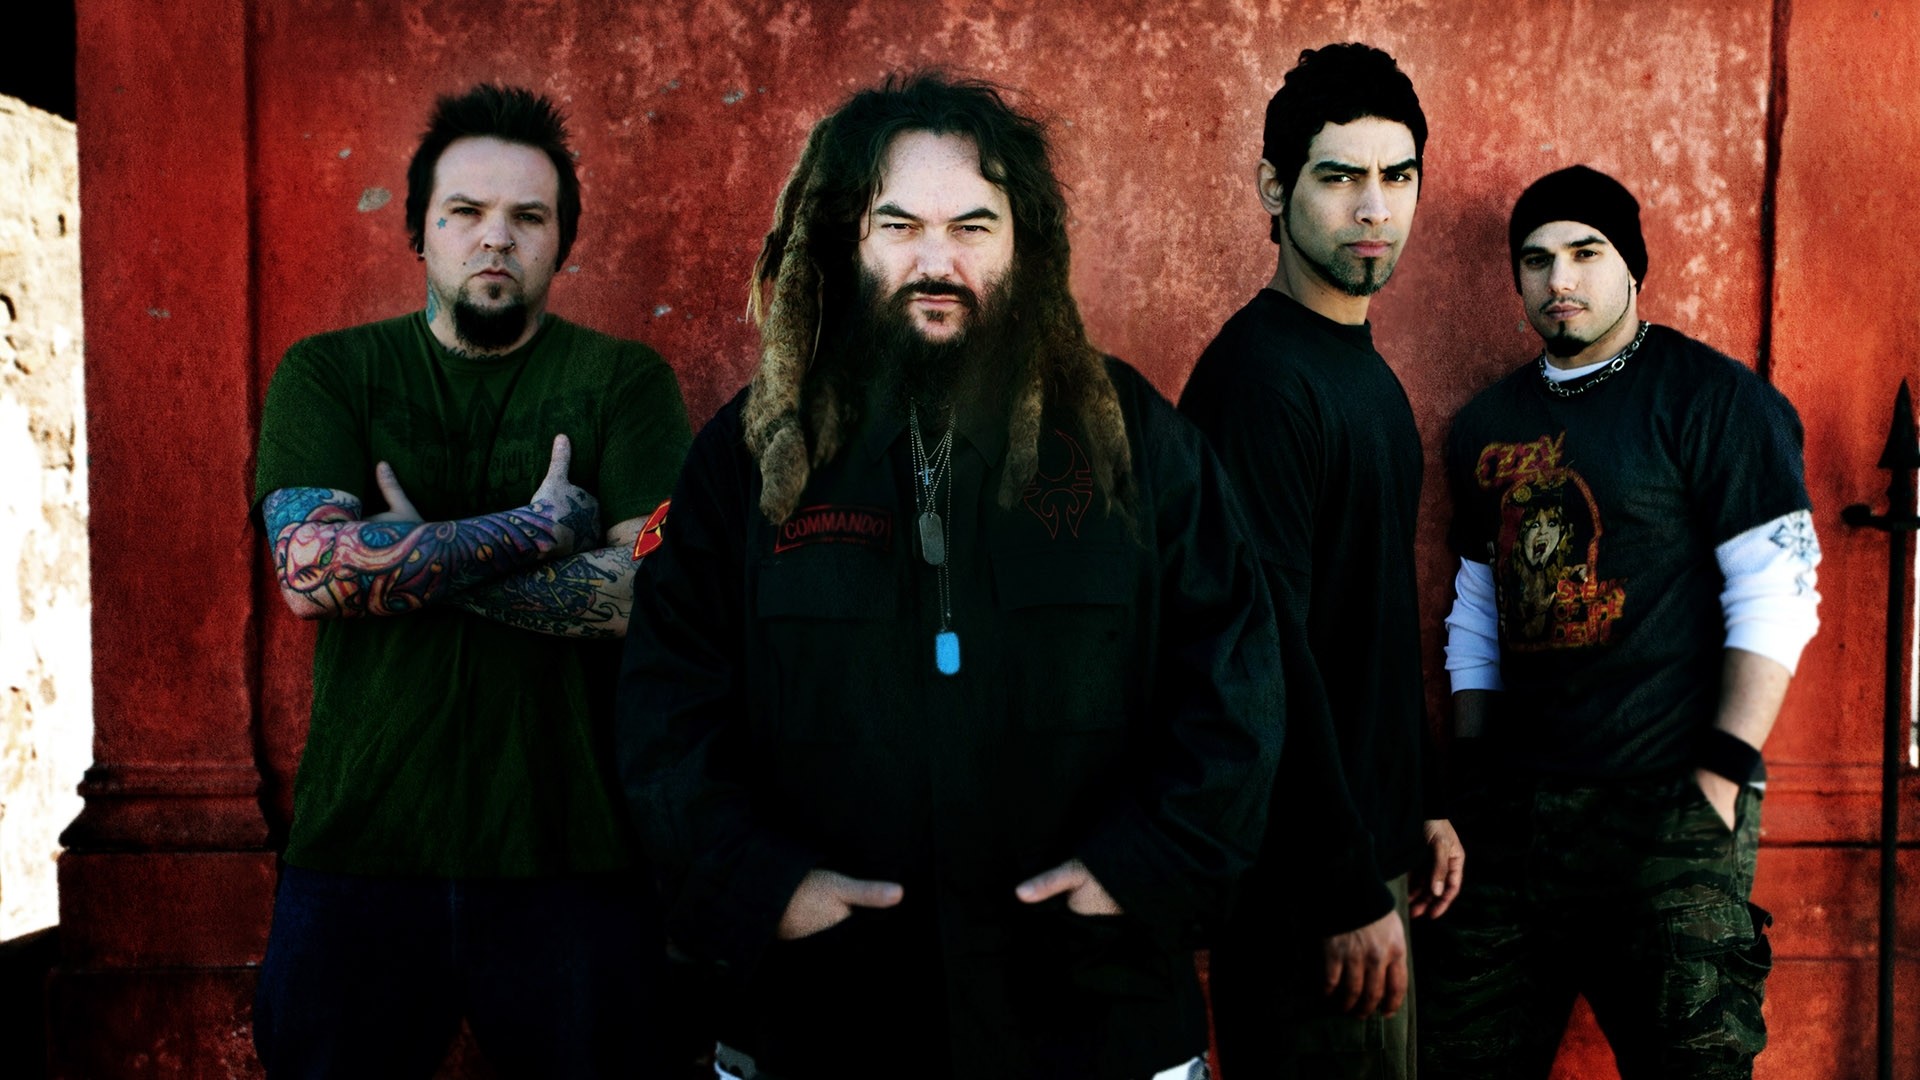 1920x1080 Wallpaper Soulfly, Band, Members, Tattoo, Dreadlocks HD, Picture, Image